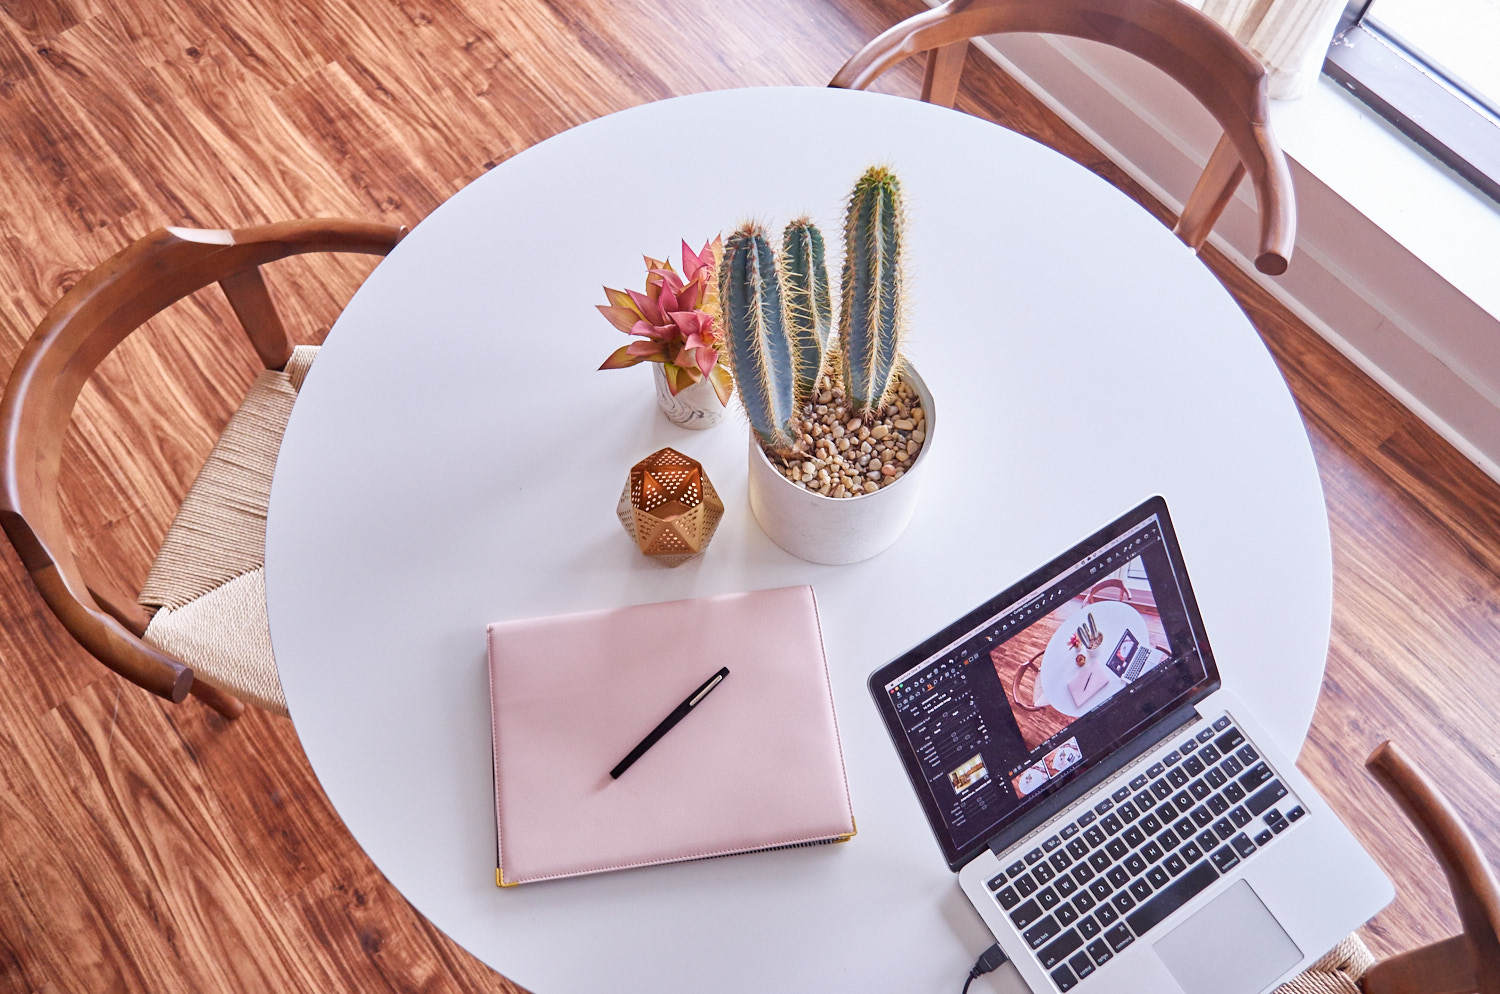 An open laptop and a cactus sit on top of a dining room table.